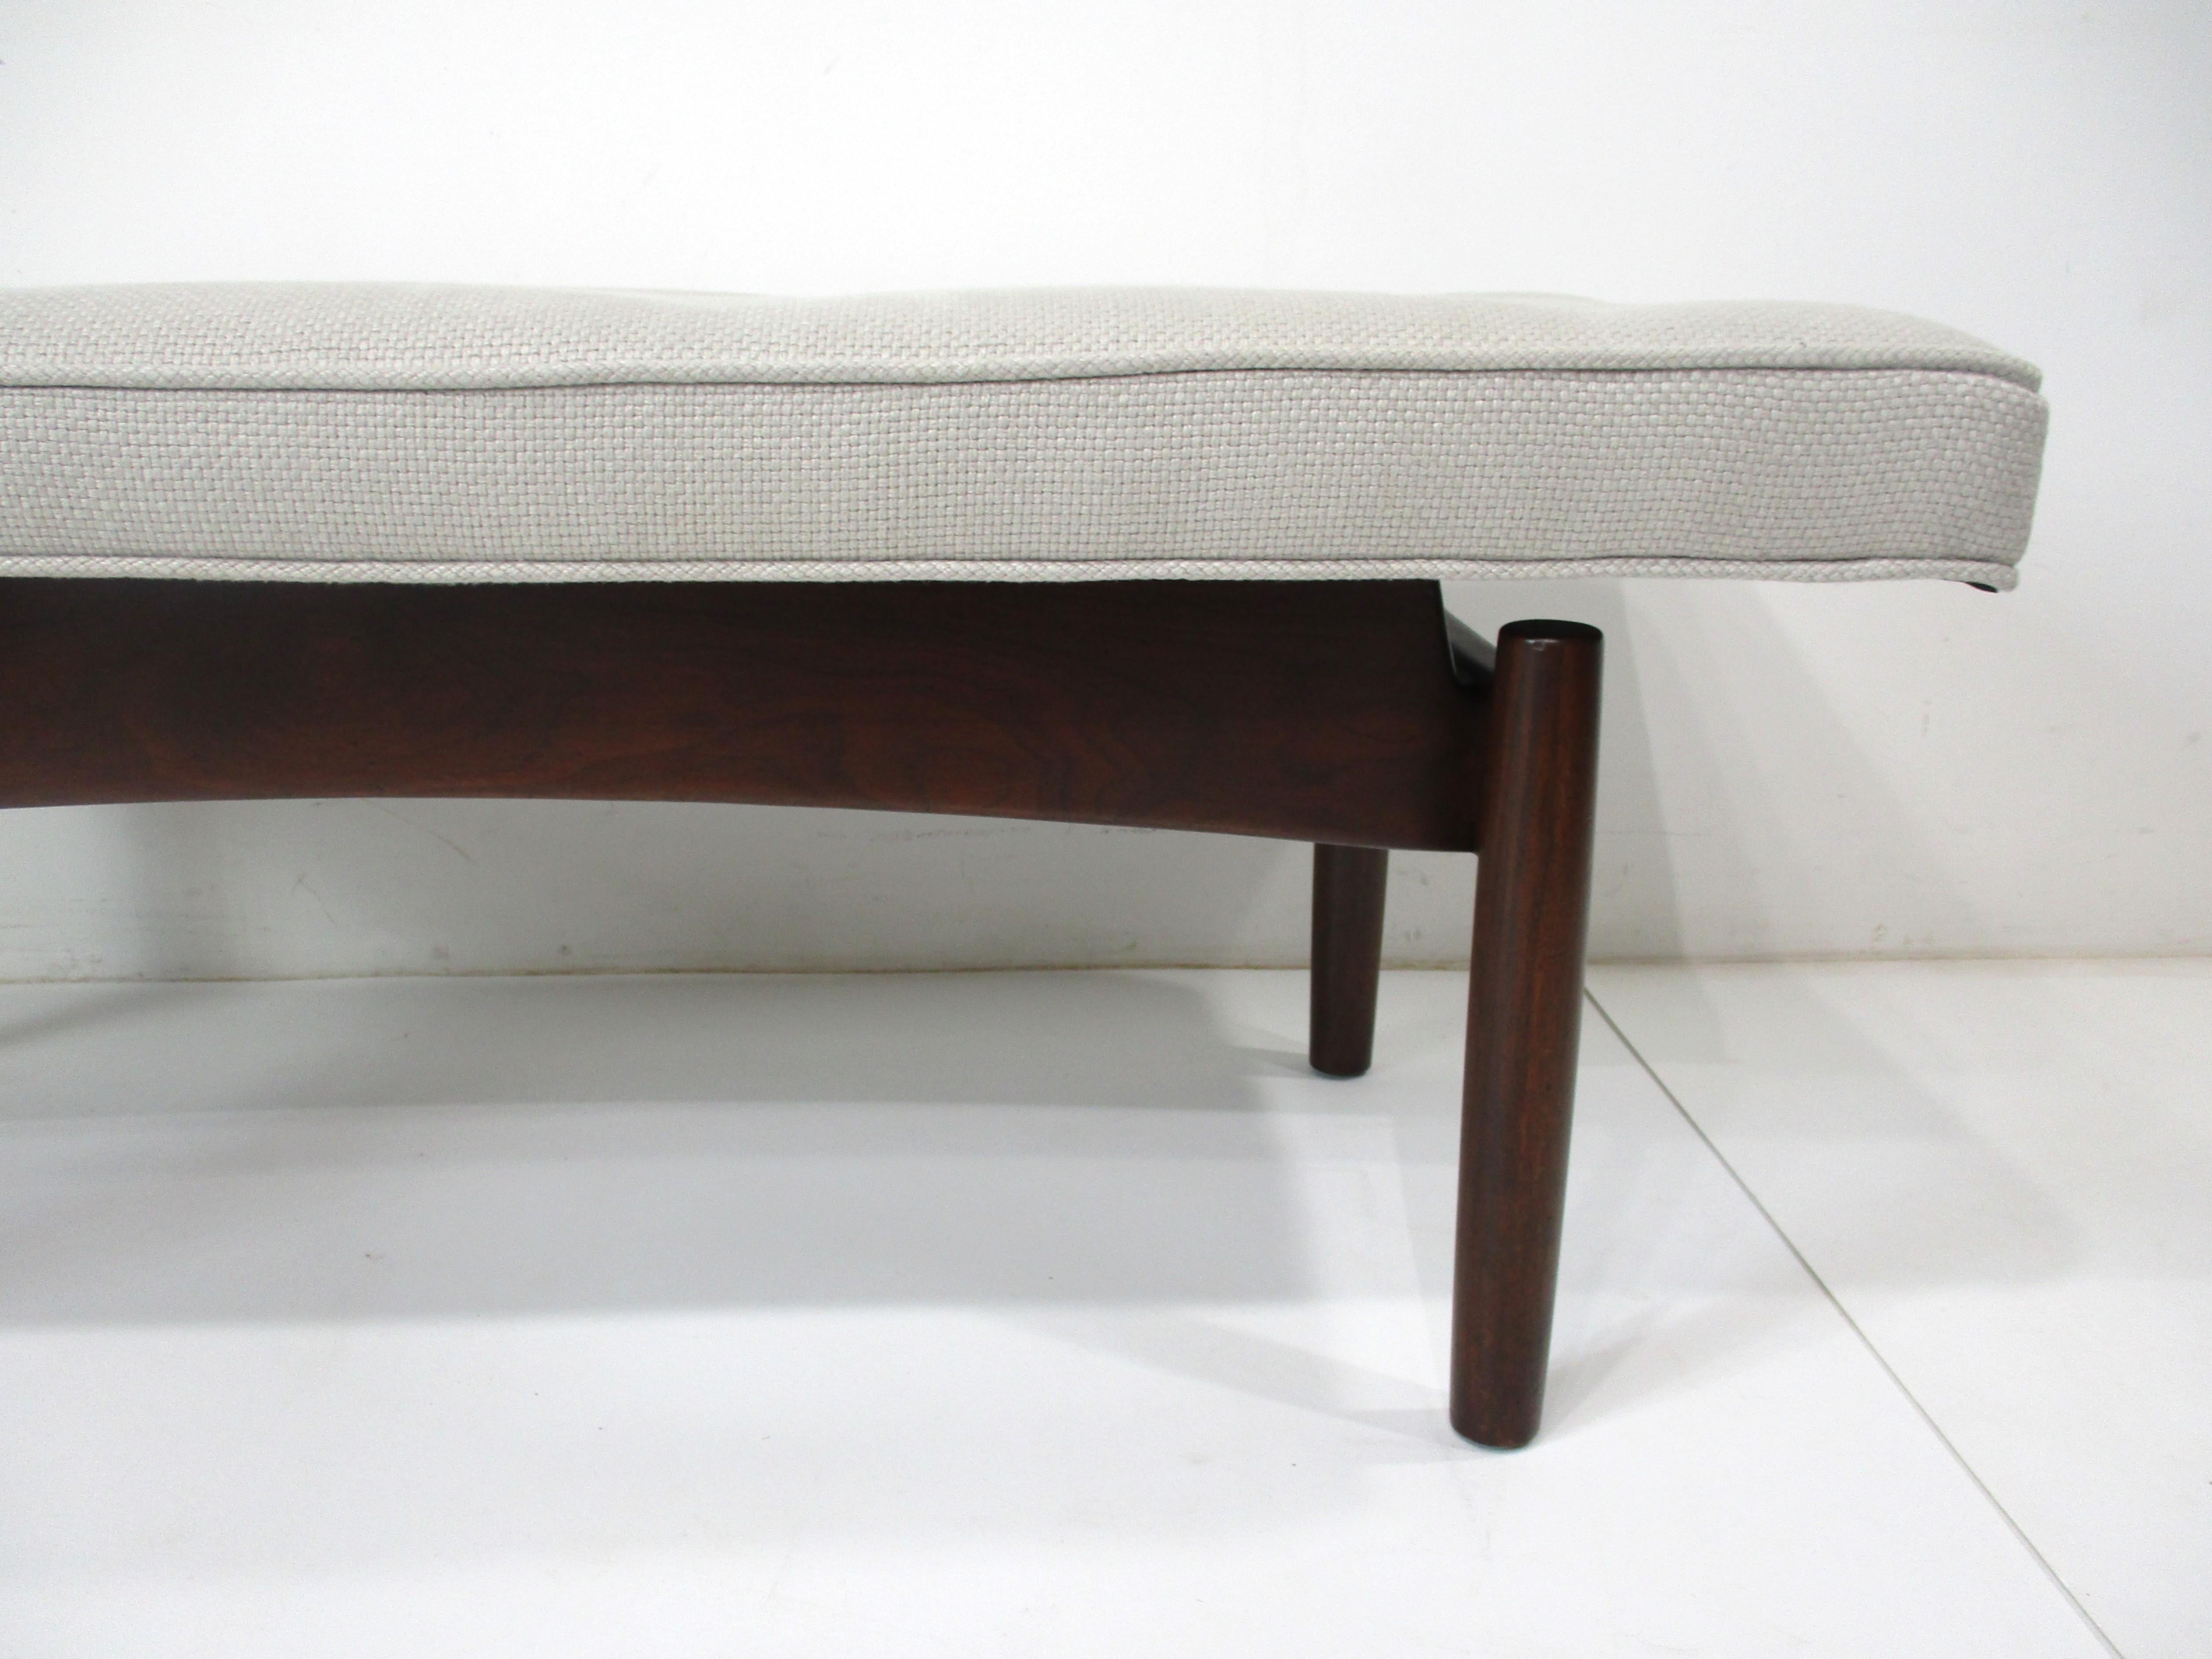 20th Century Upholstered Walnut Bench in the Style of Greta Grossman Danish Modern (A) For Sale